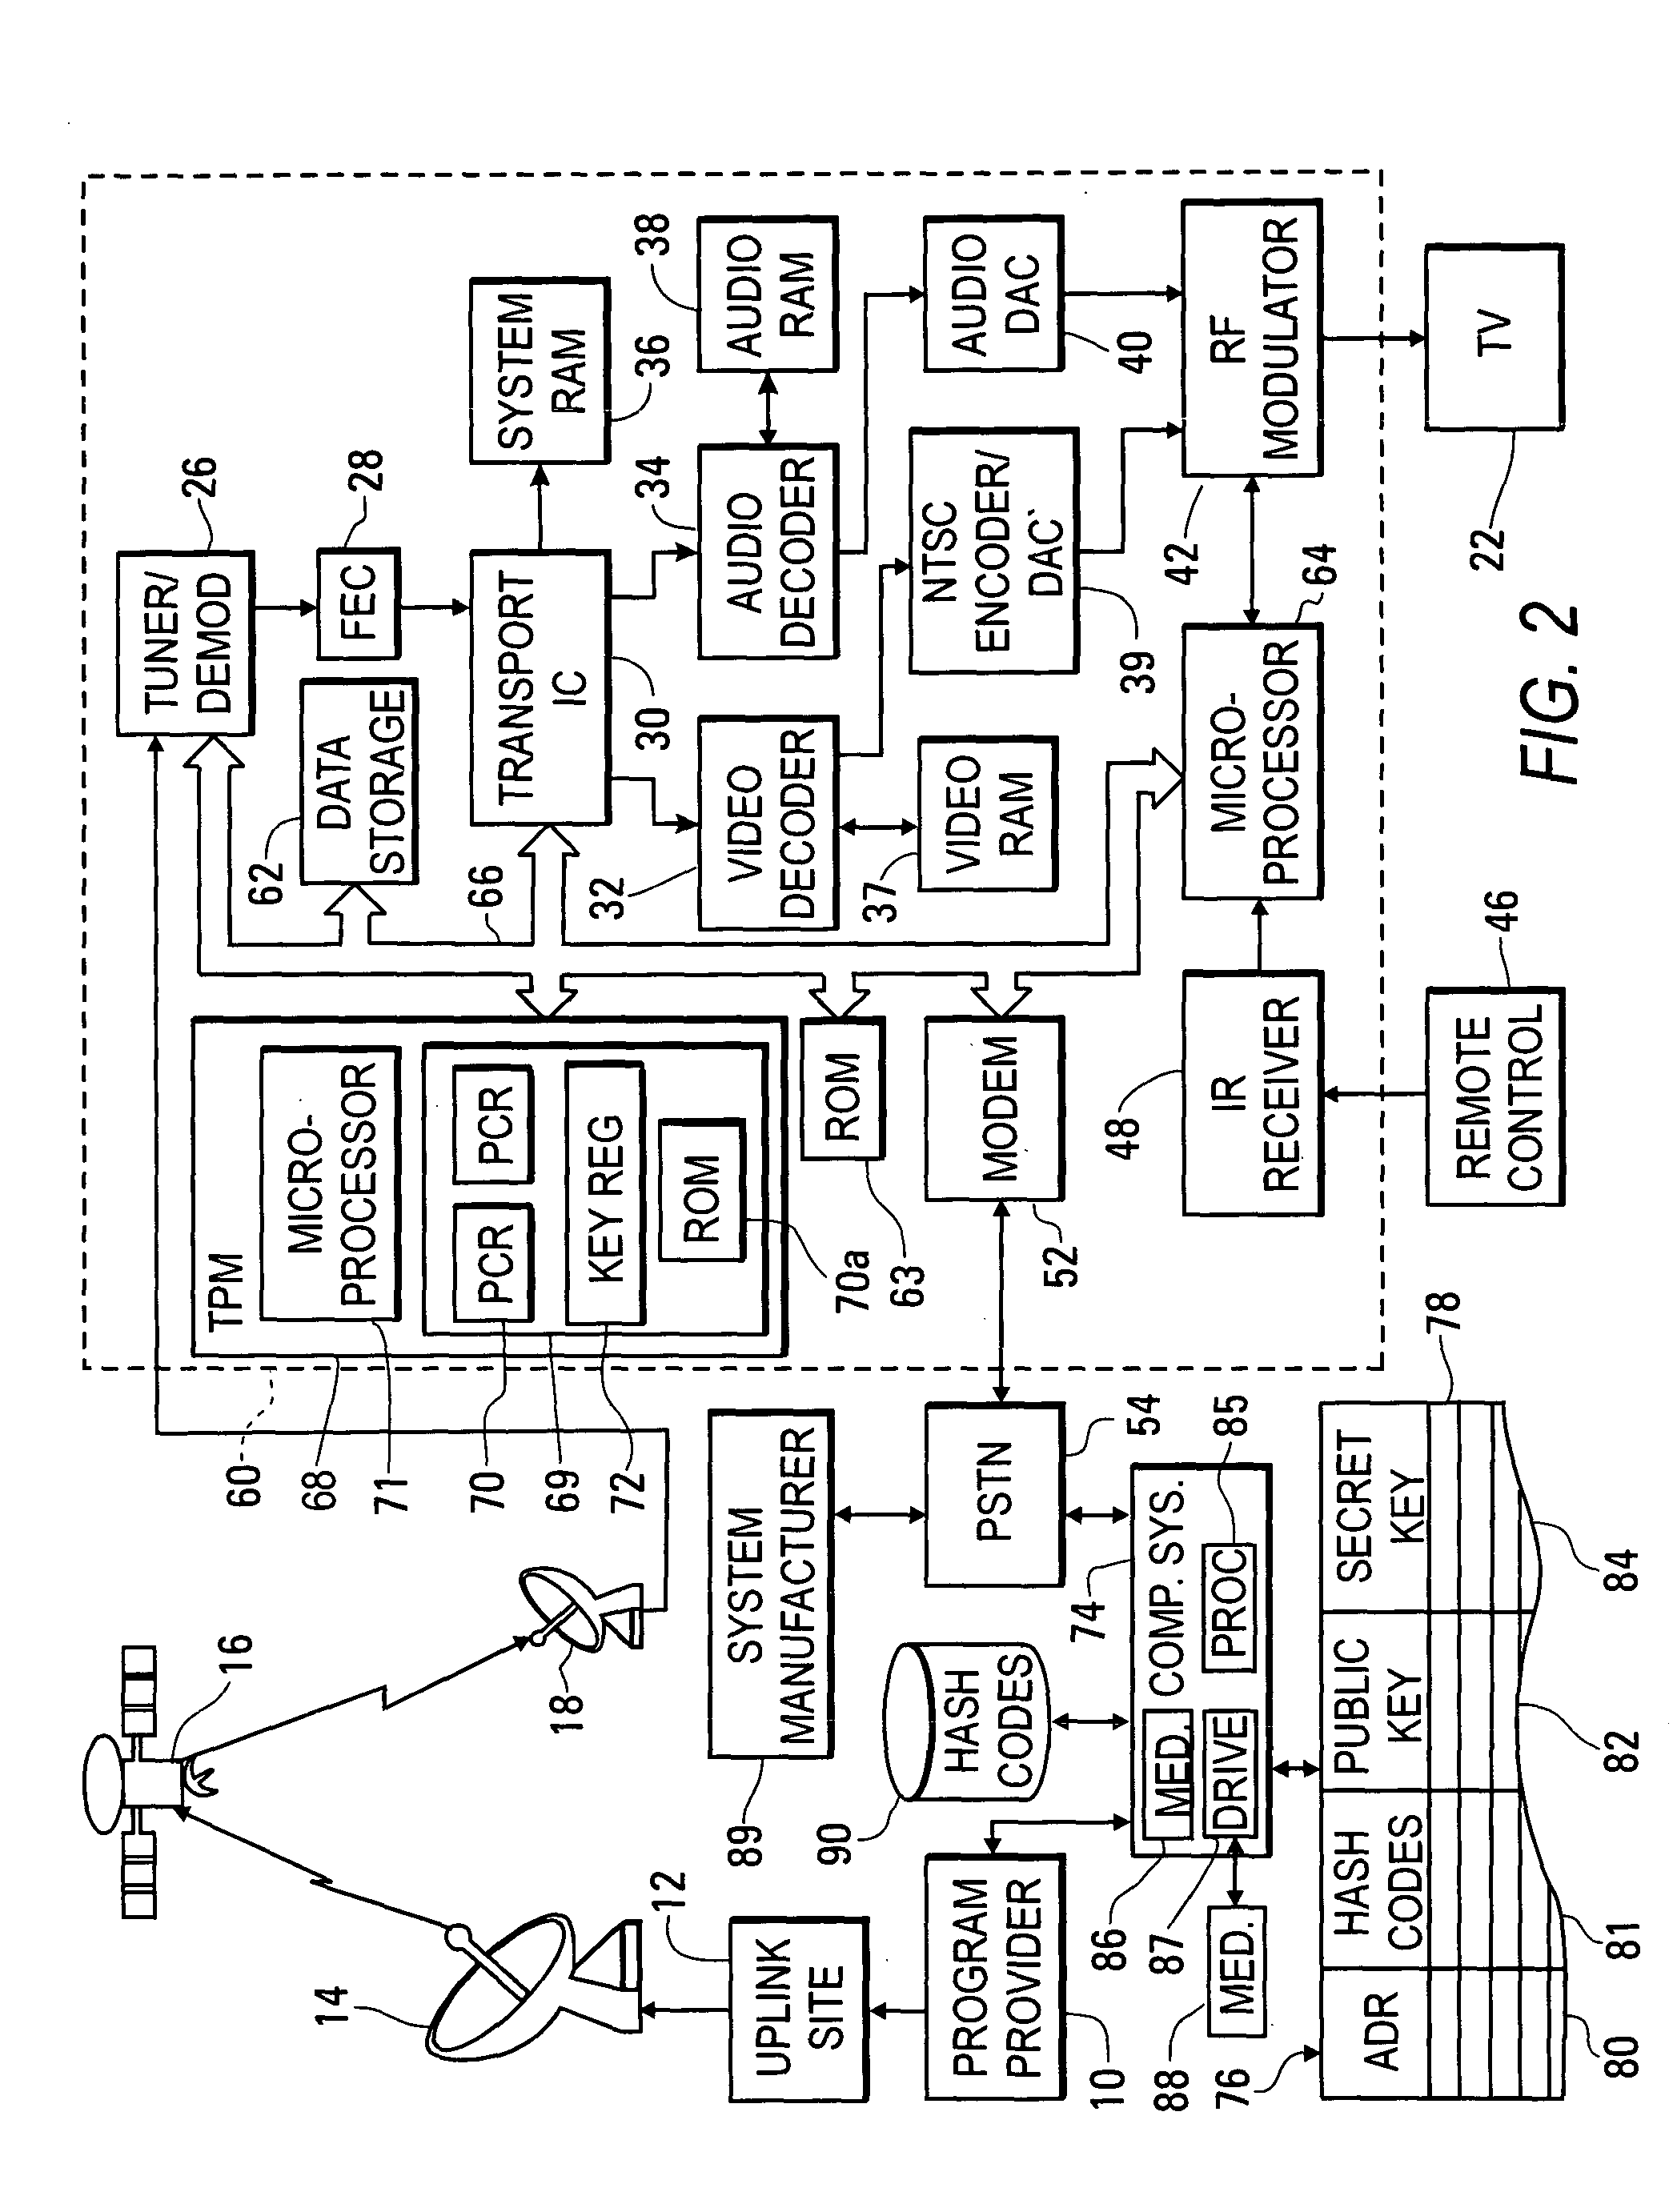 System and method for satellite broadcasting and receiving encrypted television data signals